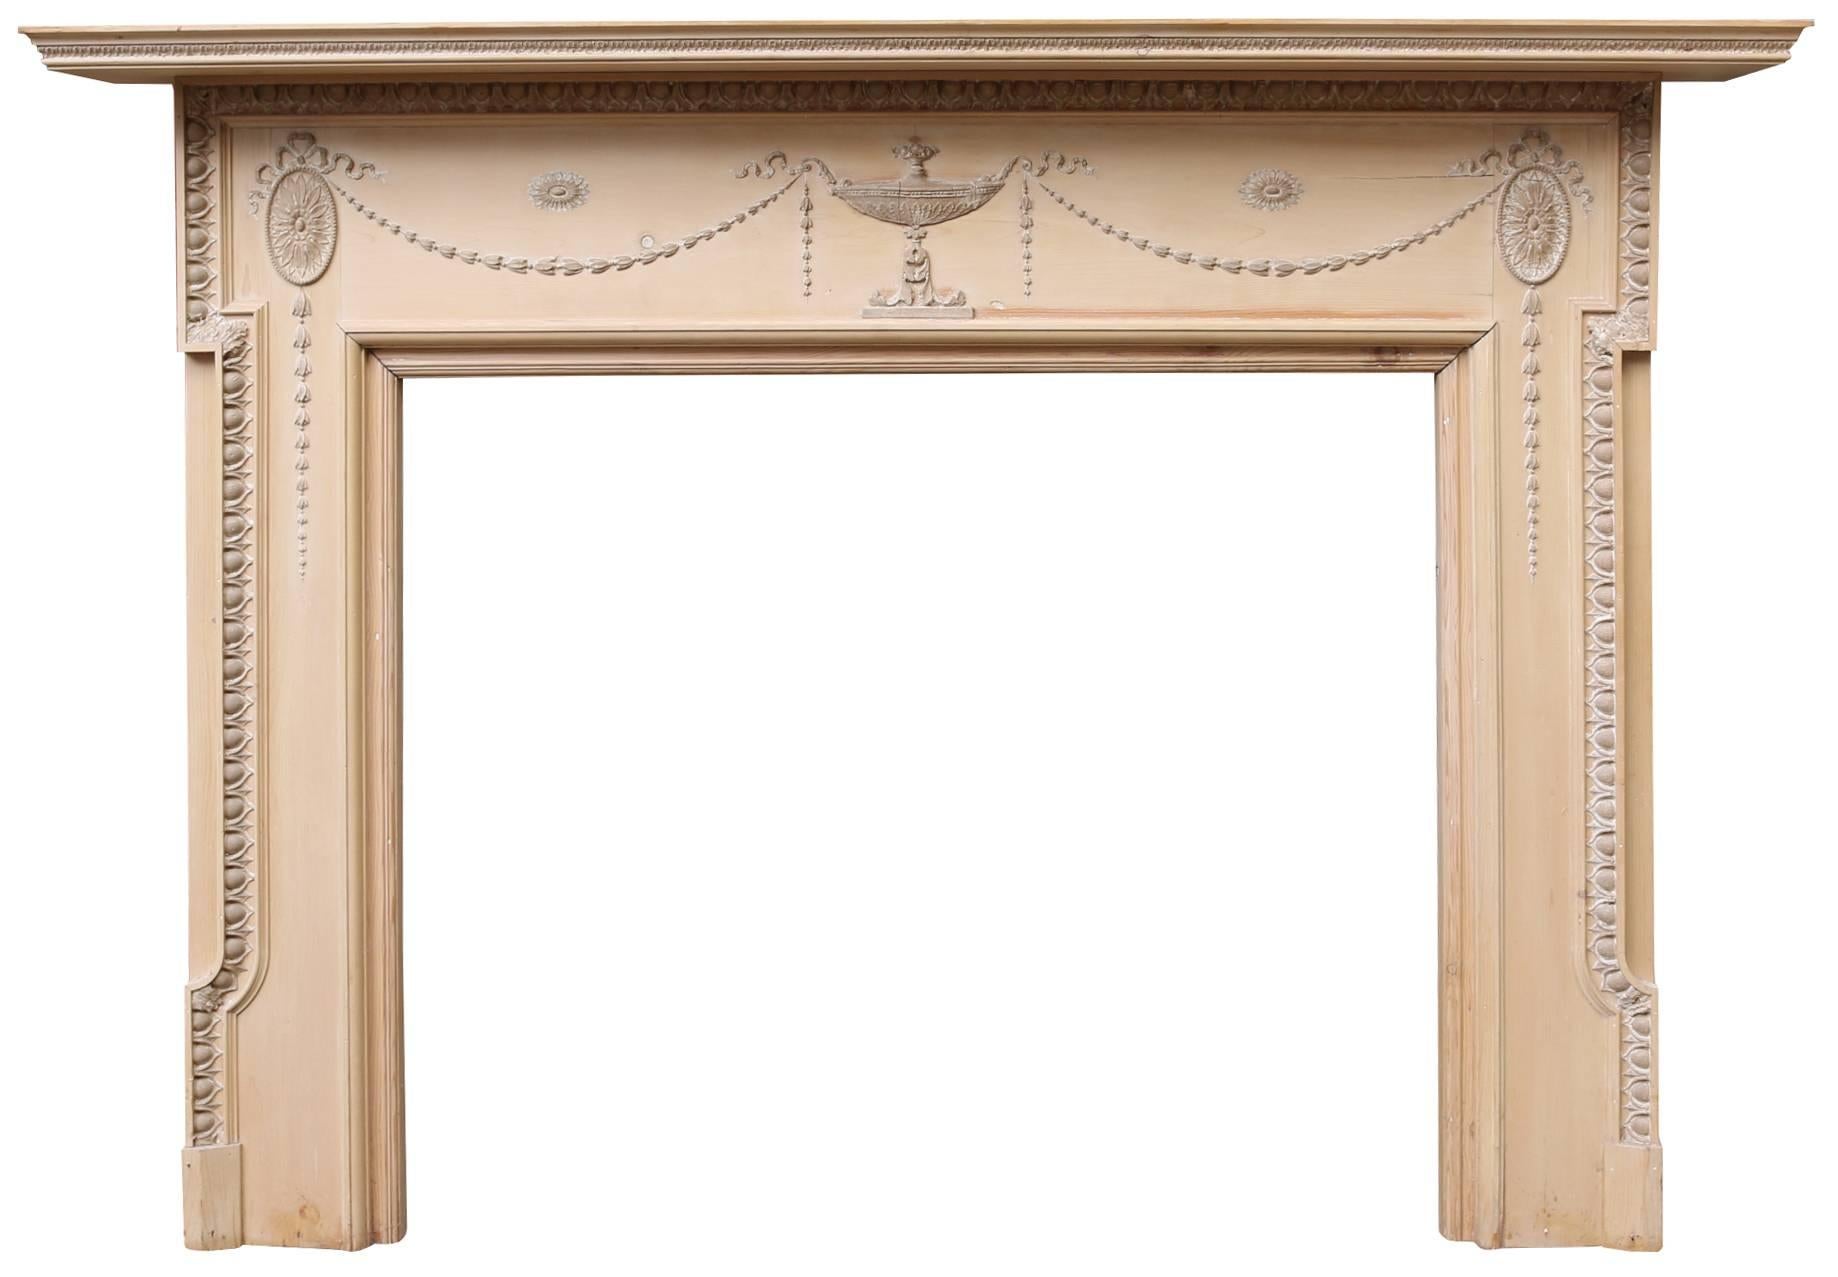 This fire surround has been stripped.
The over mantel has a small loss in the bottom right corner by the mirror.
Mantel: Height 76cm
Width:162cm

Opening height 91cm
Opening width 106cm
Width between legs 149.5cm

The measurements listed